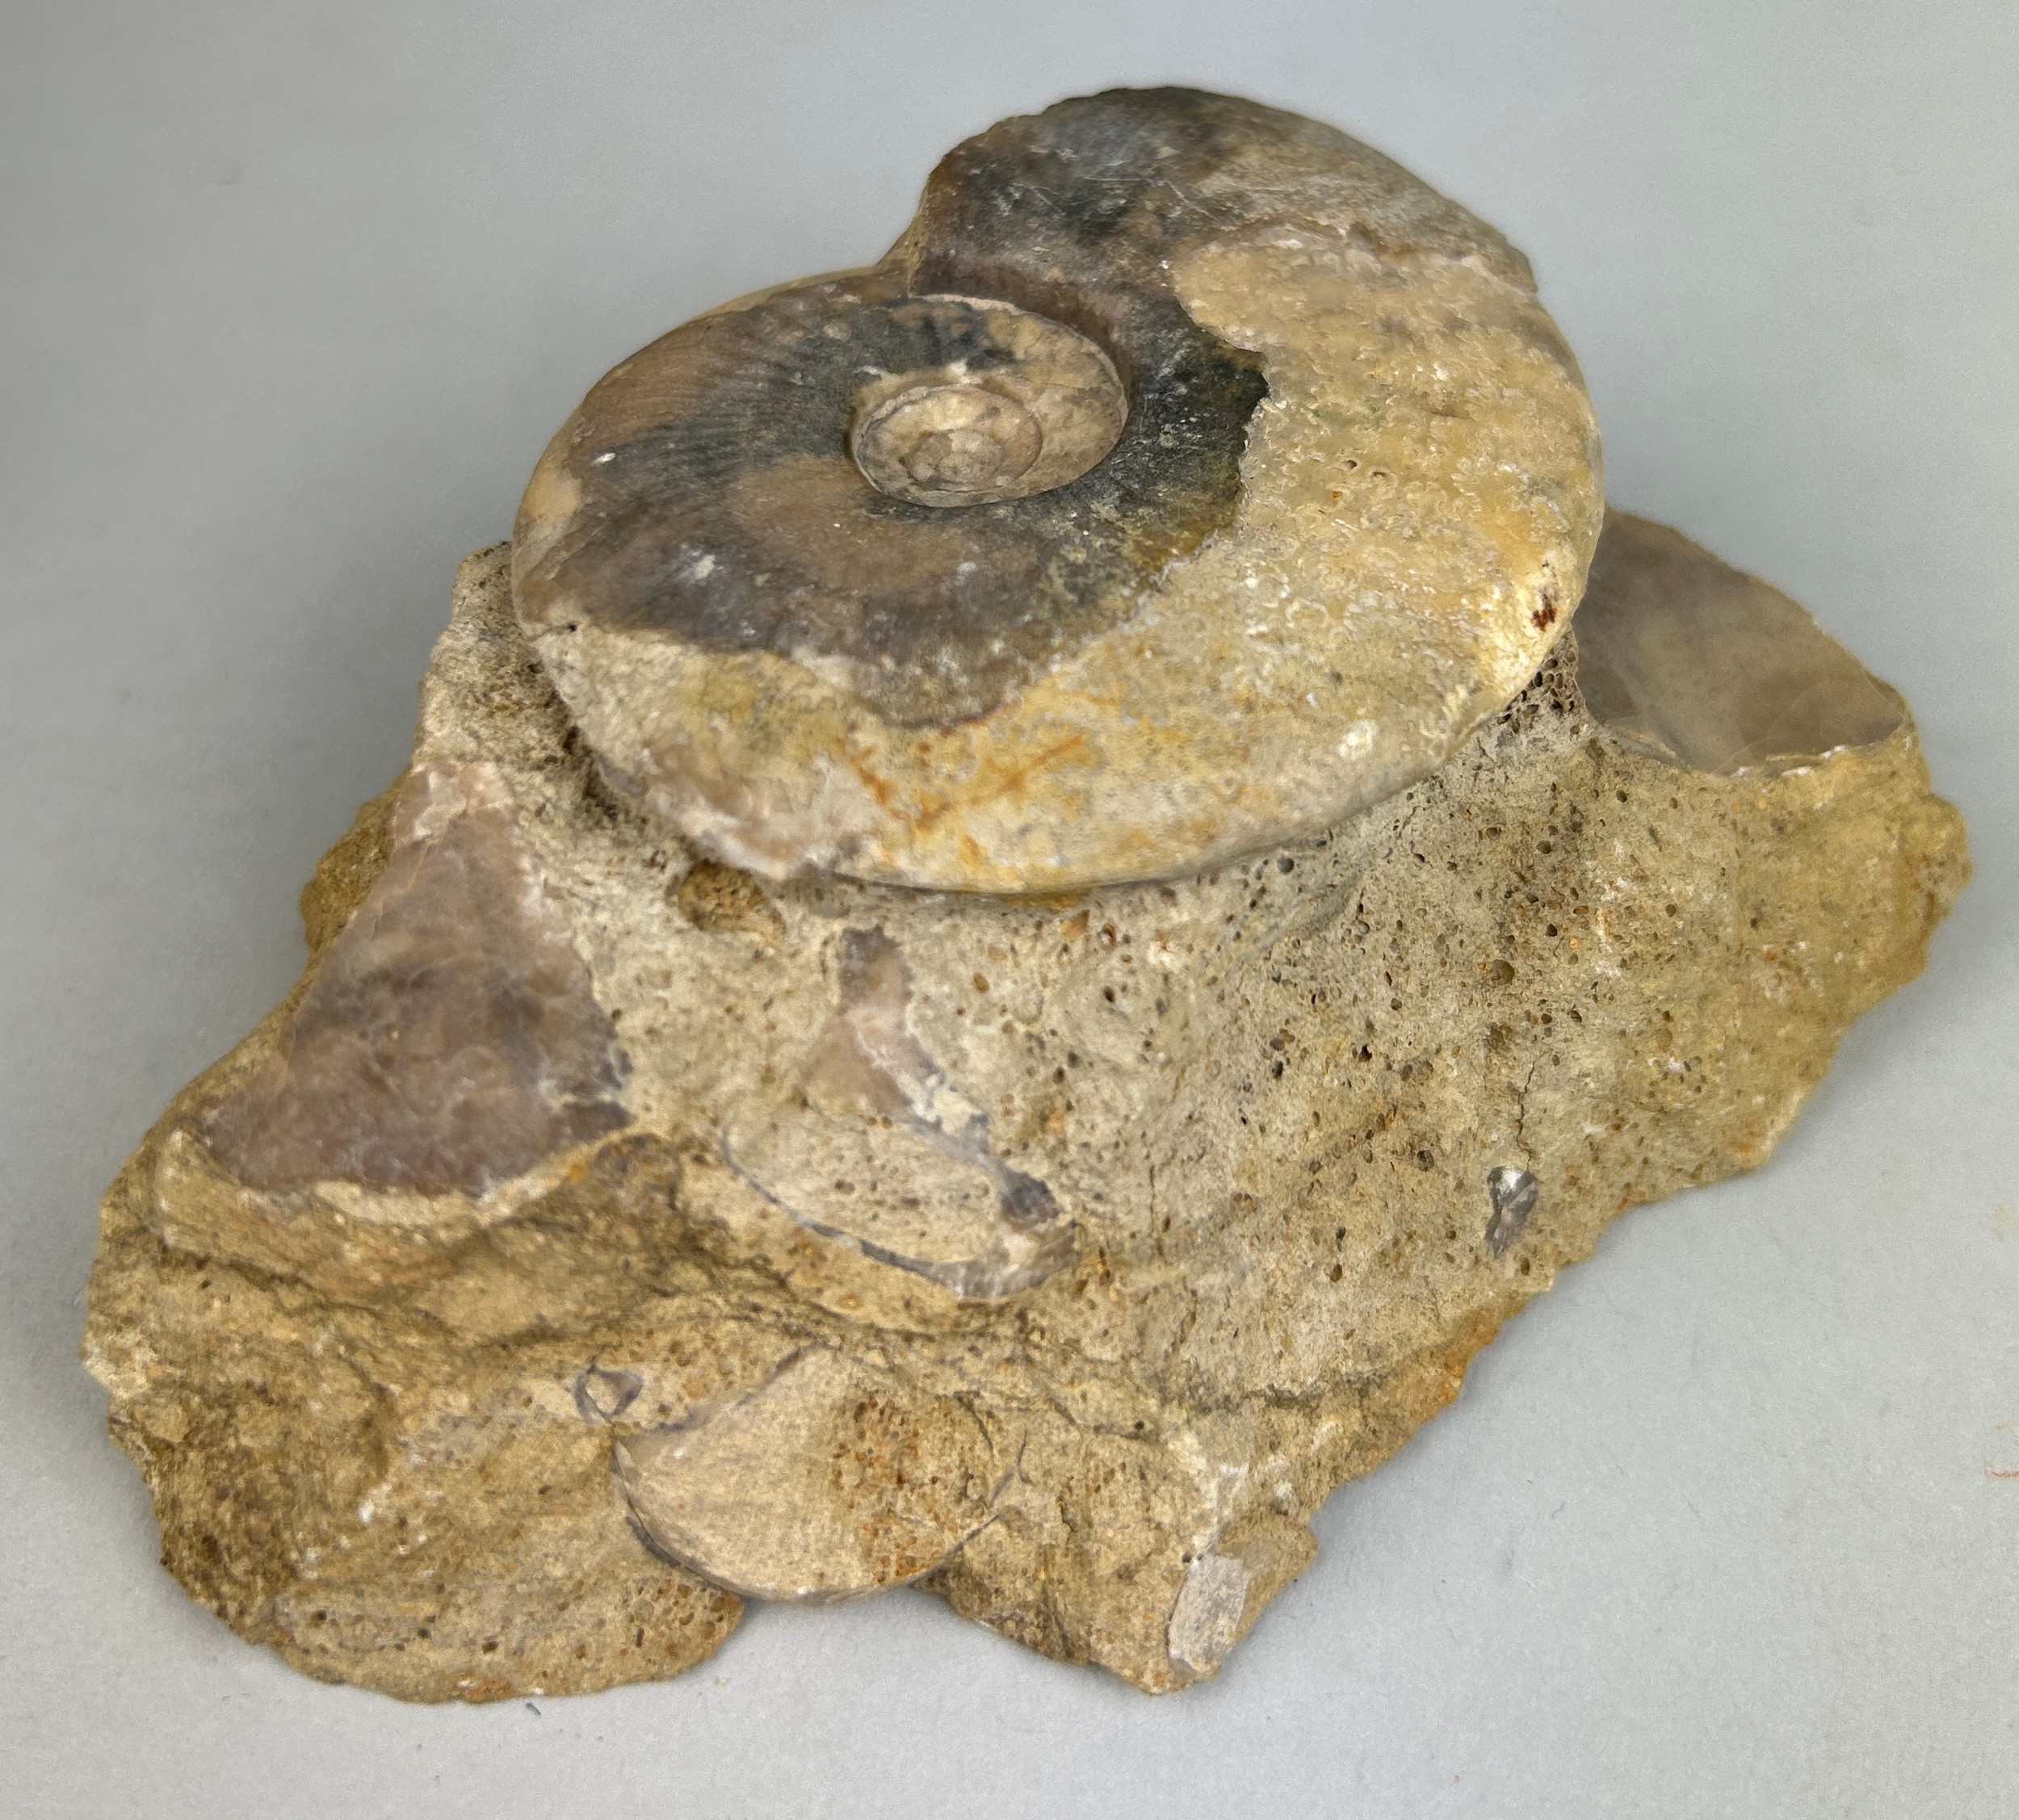 AMMONITE FOSSIL FROM DORSET Prepared out of original stone matrix. Jurassic - 160 million years old. - Image 3 of 3